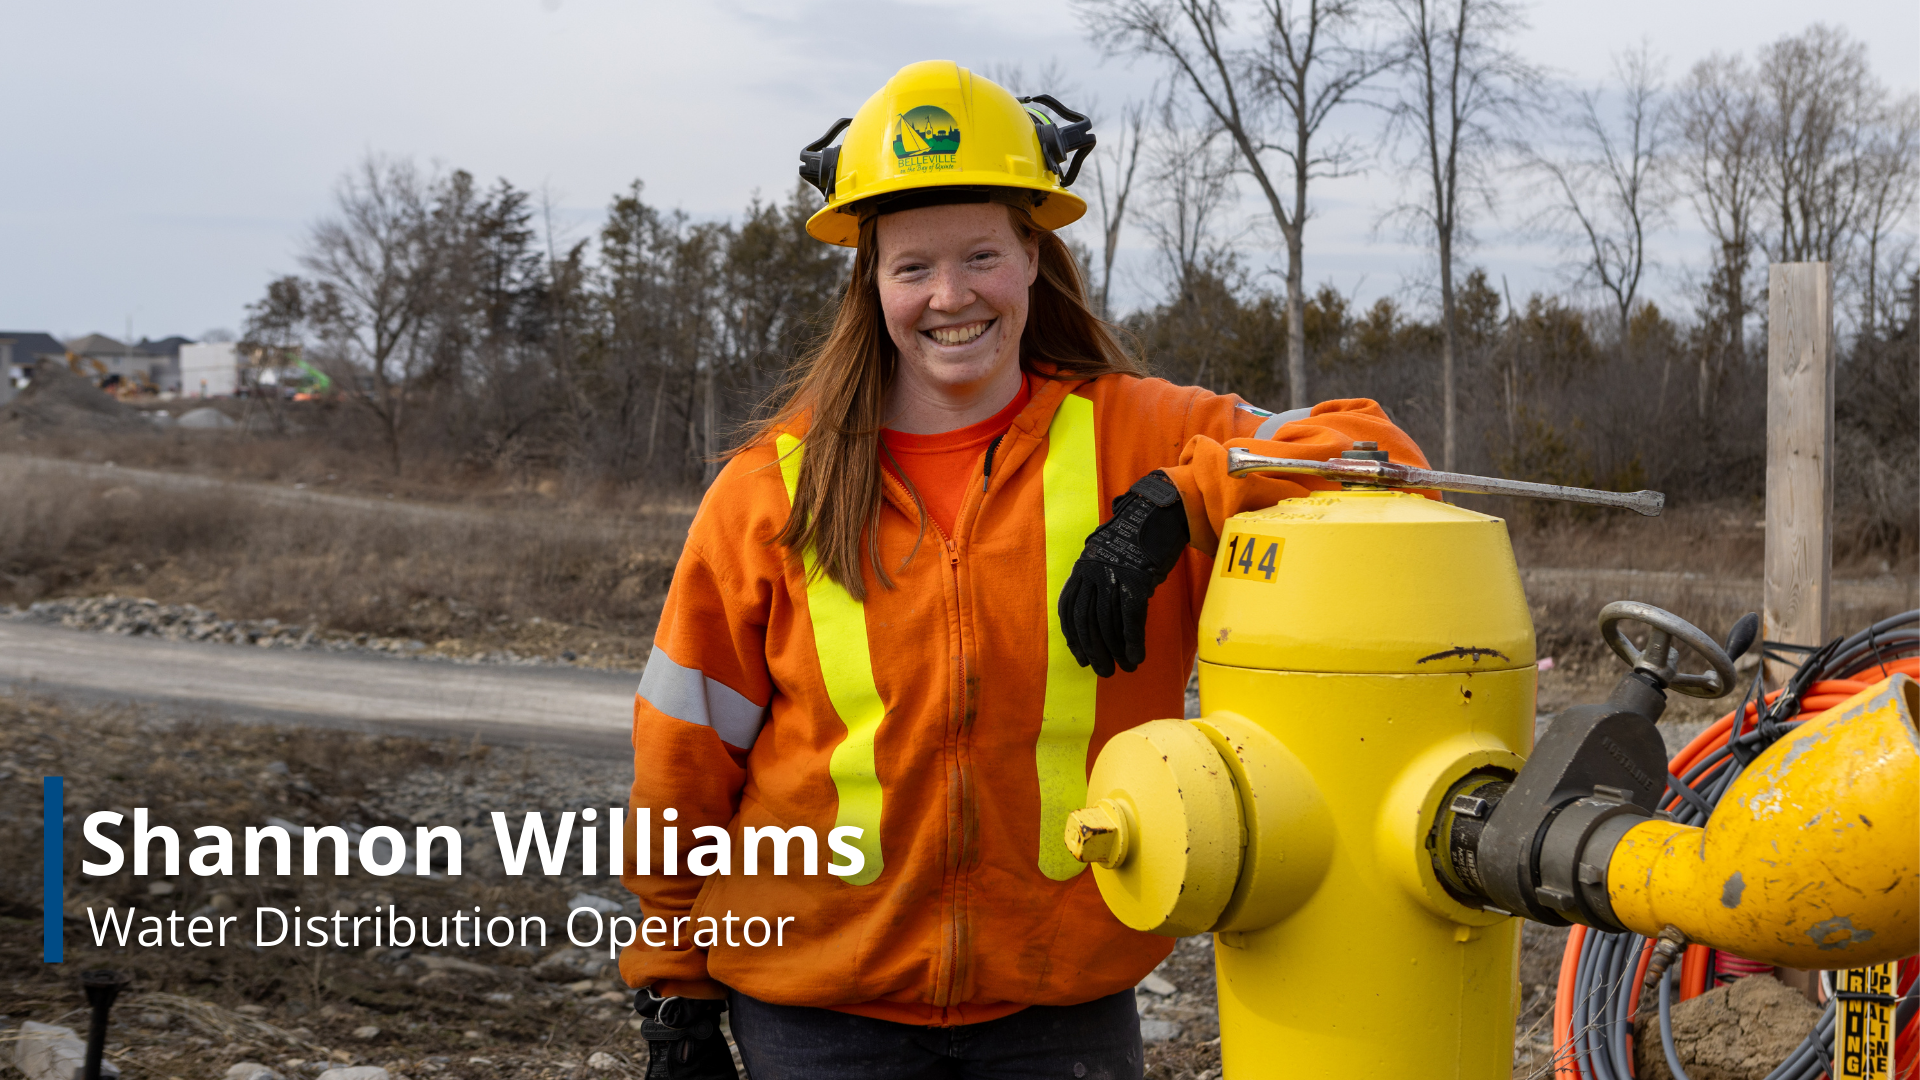 A photo of Shannon Williams, a Water Distribution Operator, leaning against a fire hydrant.